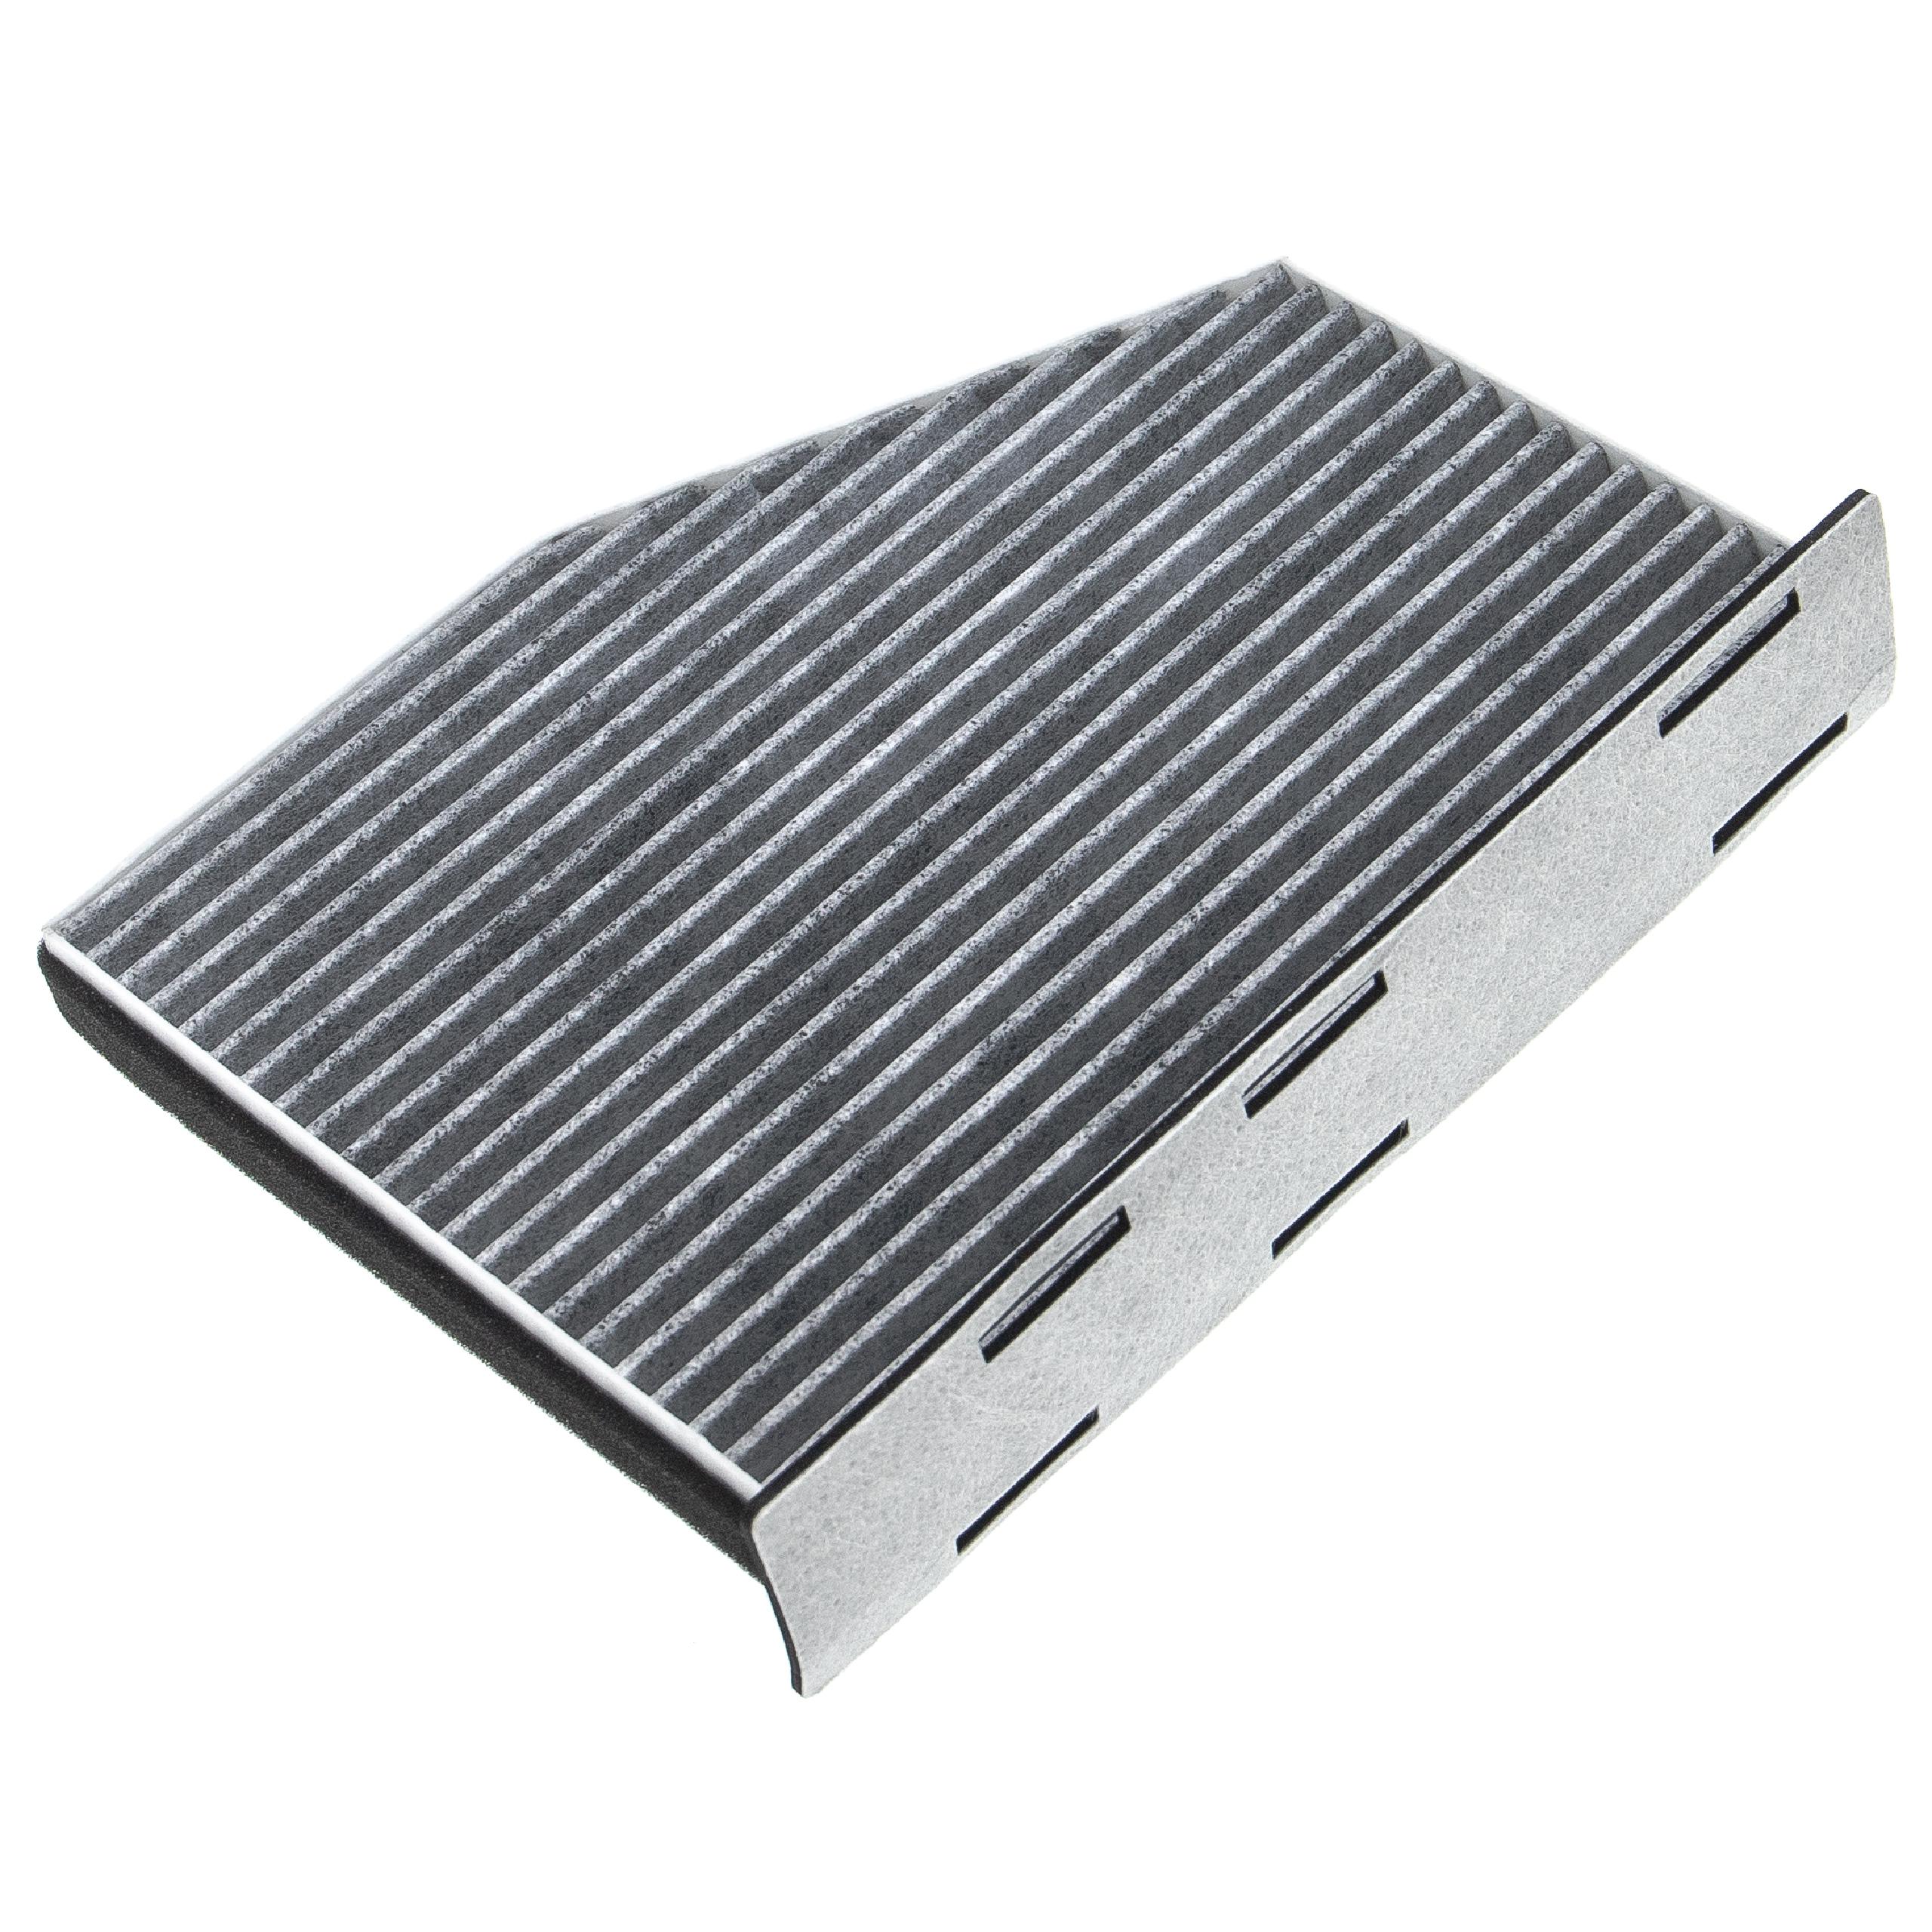 Cabin Air Filter replaces 1A First Automotive K30118